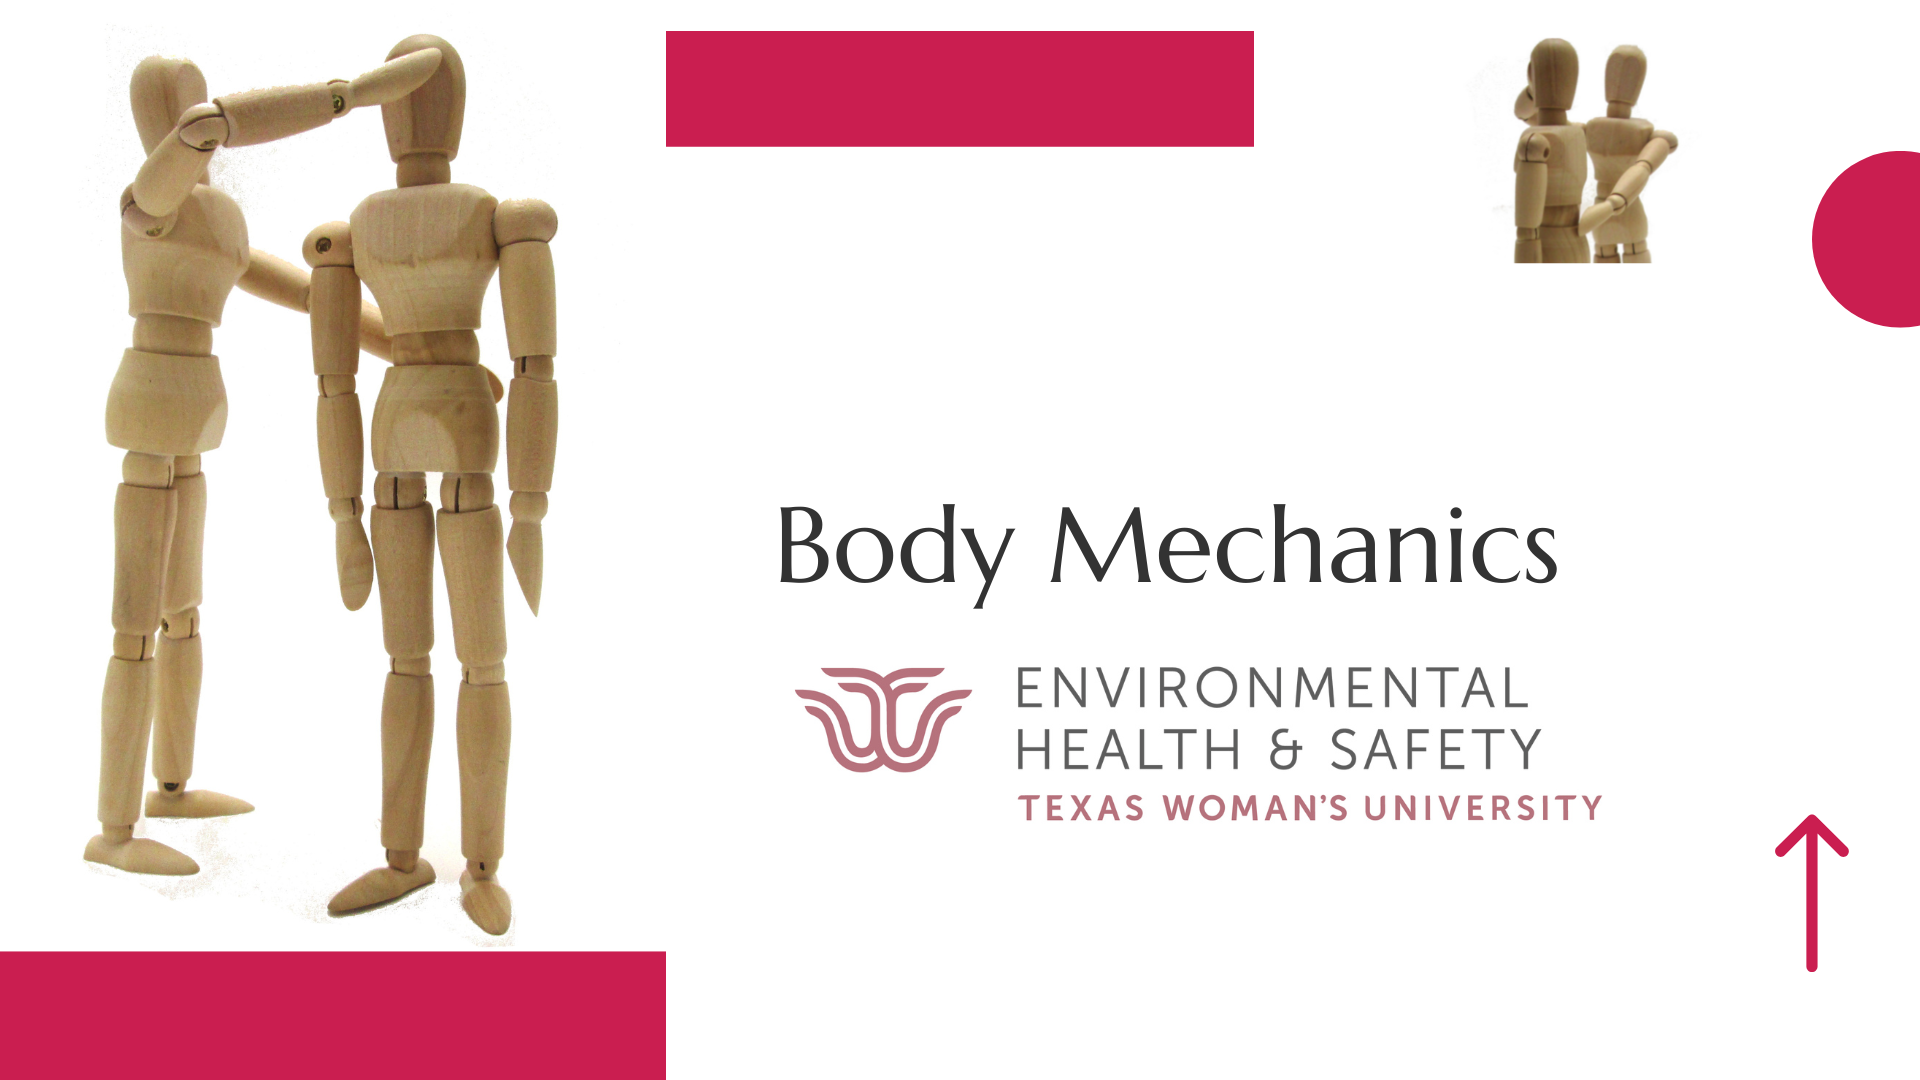 Graphic featuring wooden body models, the words "Body Mechanics", and the logo for TWU Environmental Health and Safety